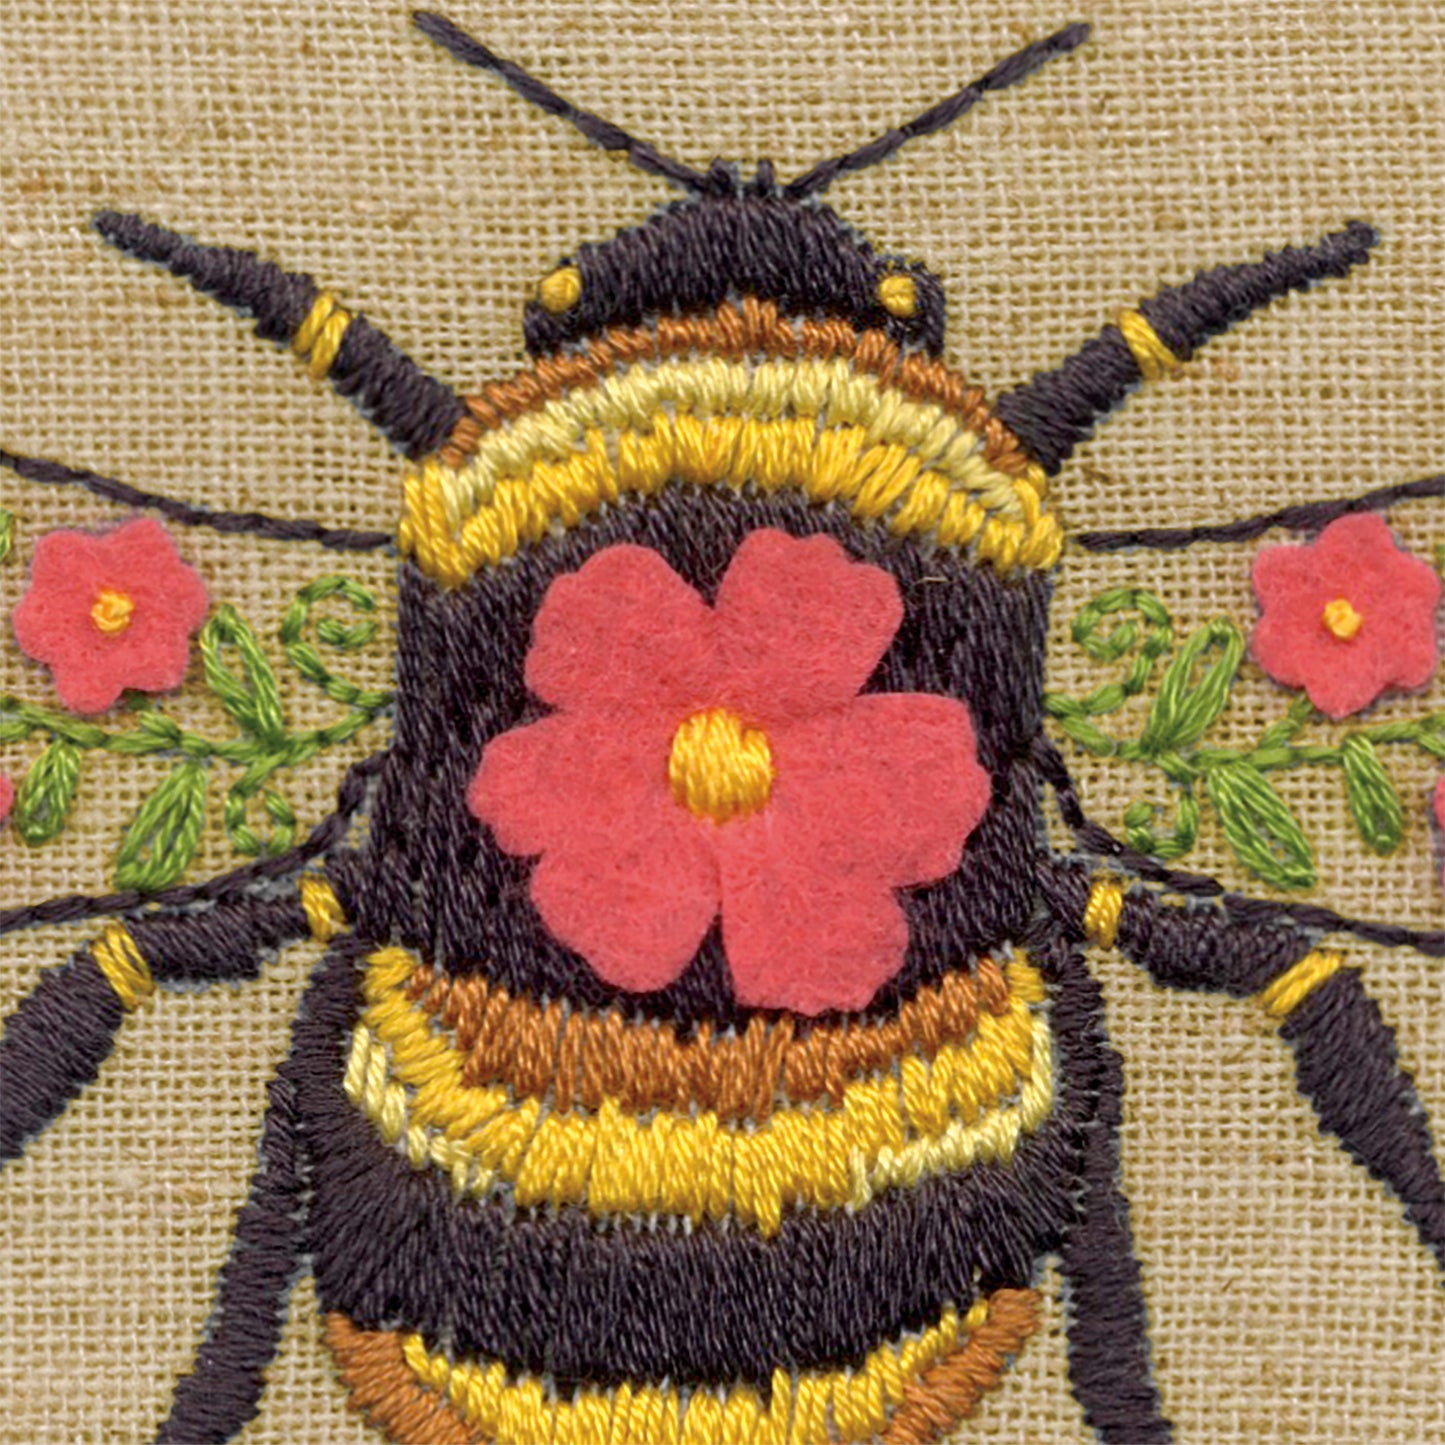 Dimension Learn a Craft Embroidery Kit - "Bee Kind"